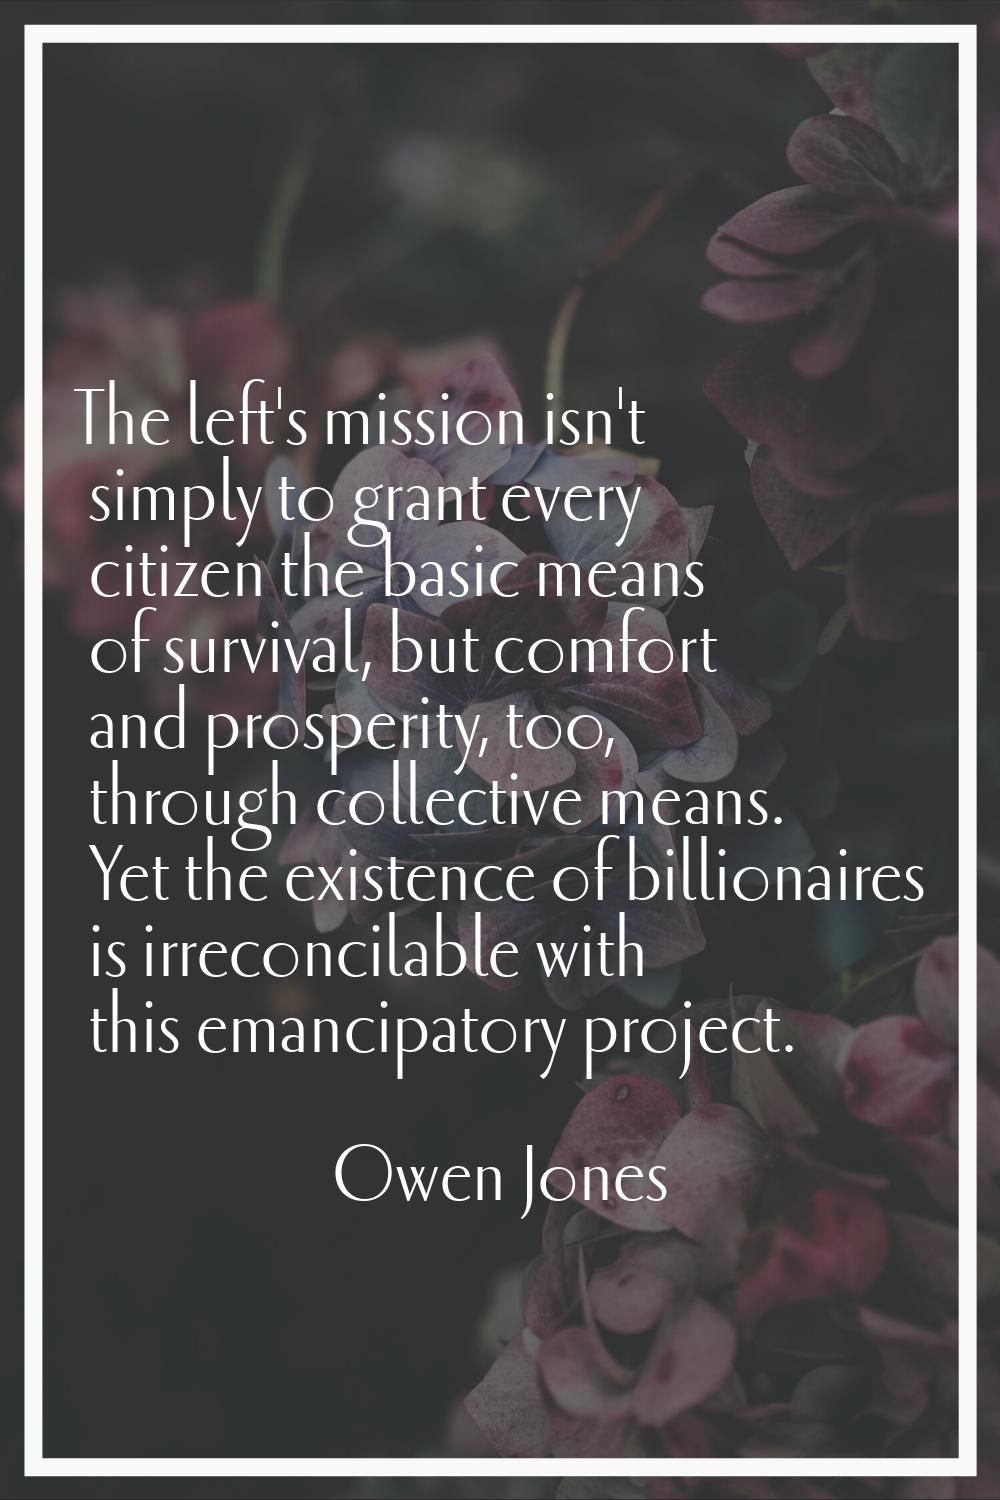 The left's mission isn't simply to grant every citizen the basic means of survival, but comfort and